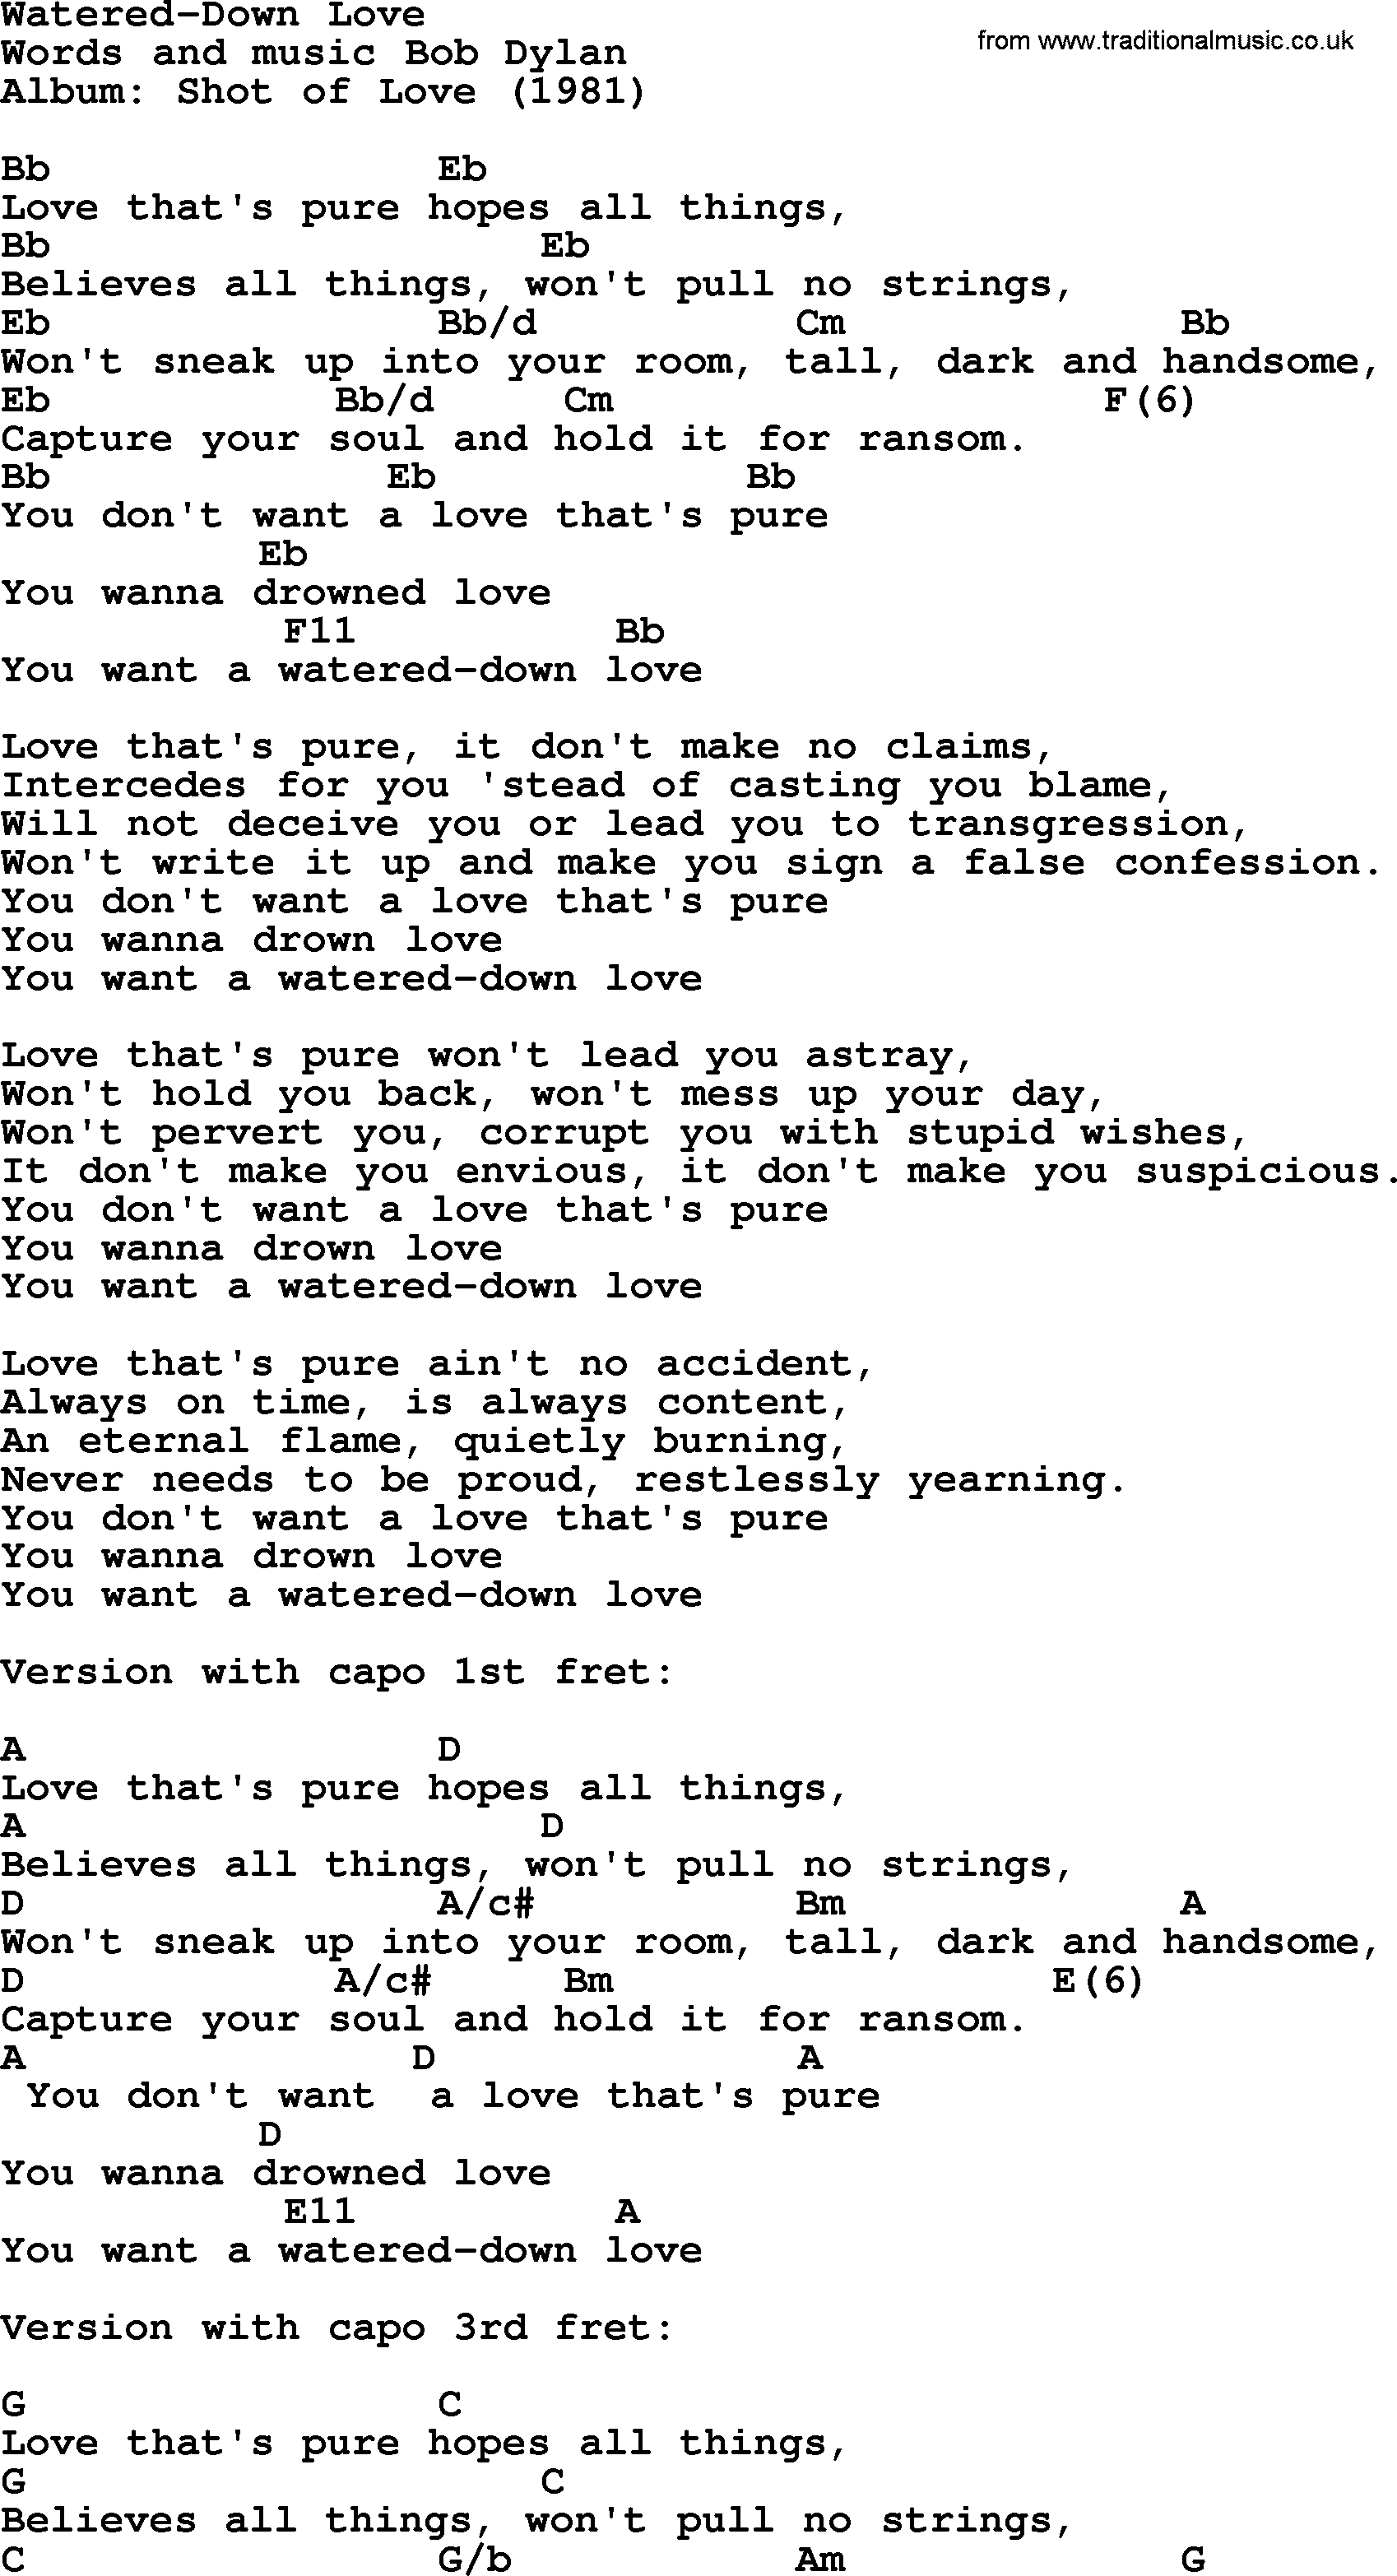 Bob Dylan song, lyrics with chords - Watered-Down Love